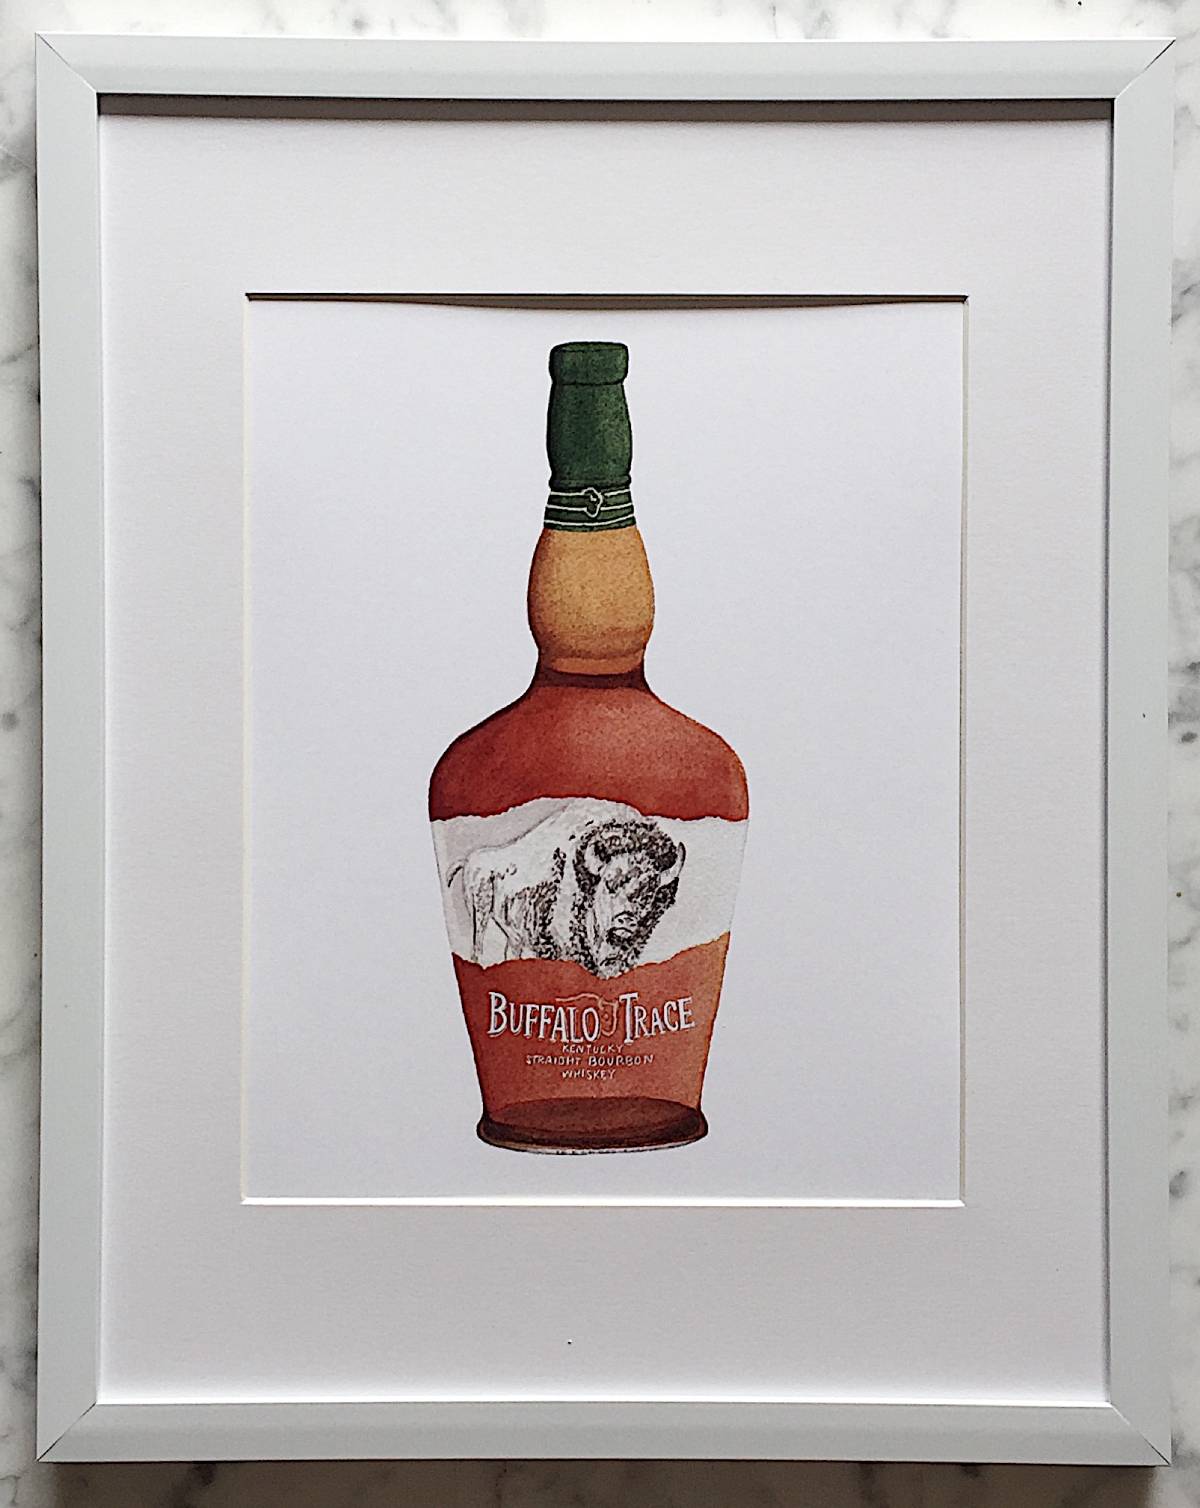 A detailed watercolor art print of a Buffalo Trace bourbon bottle with a crisp white background